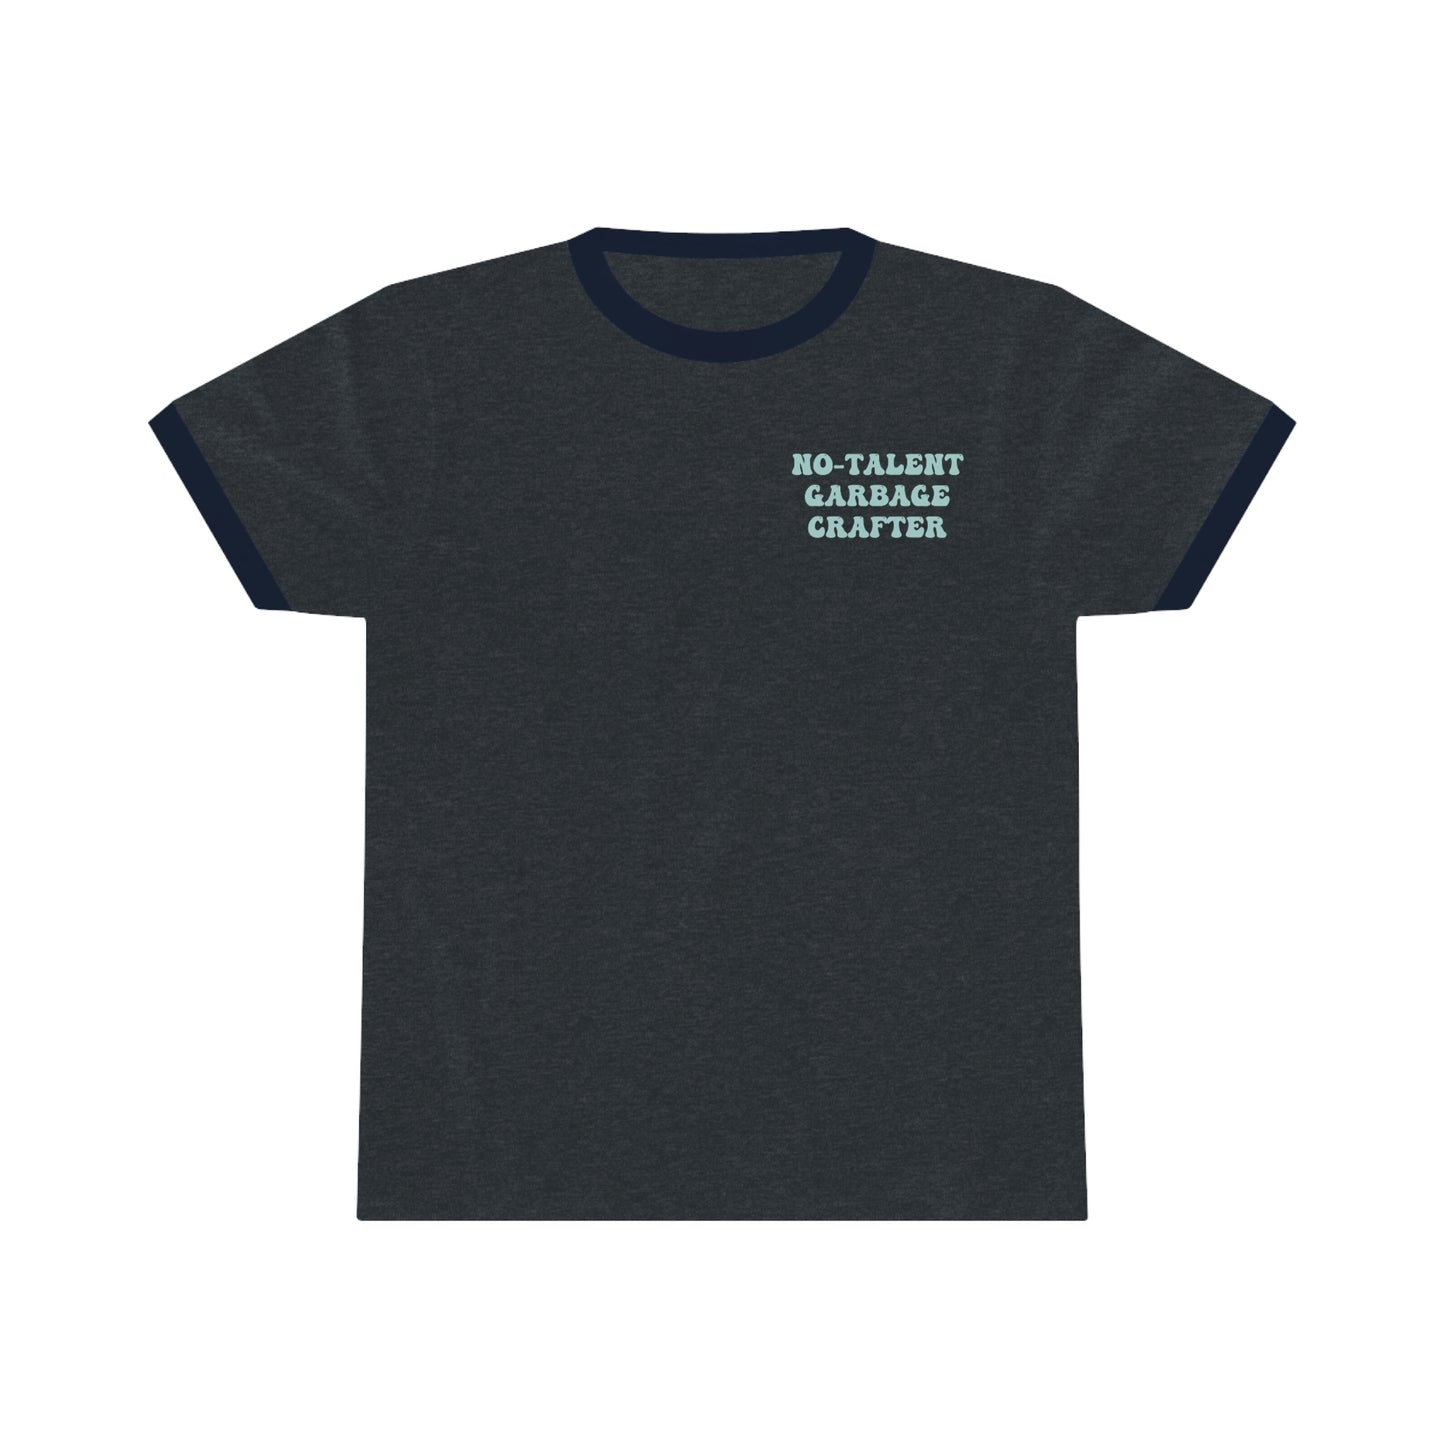 No-Talent Garbage Crafter-  Ringer Tee